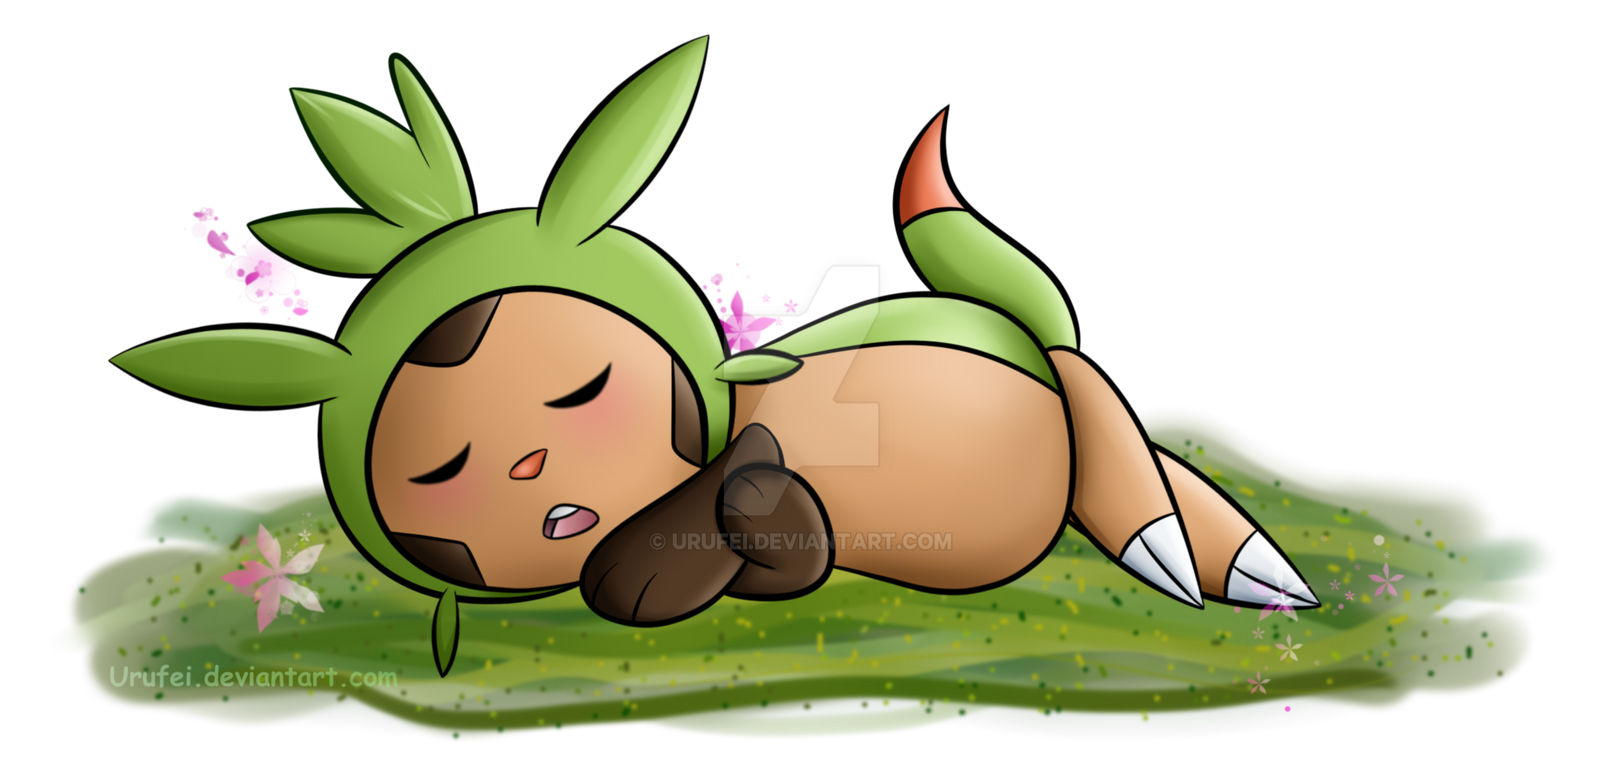 Chespin!